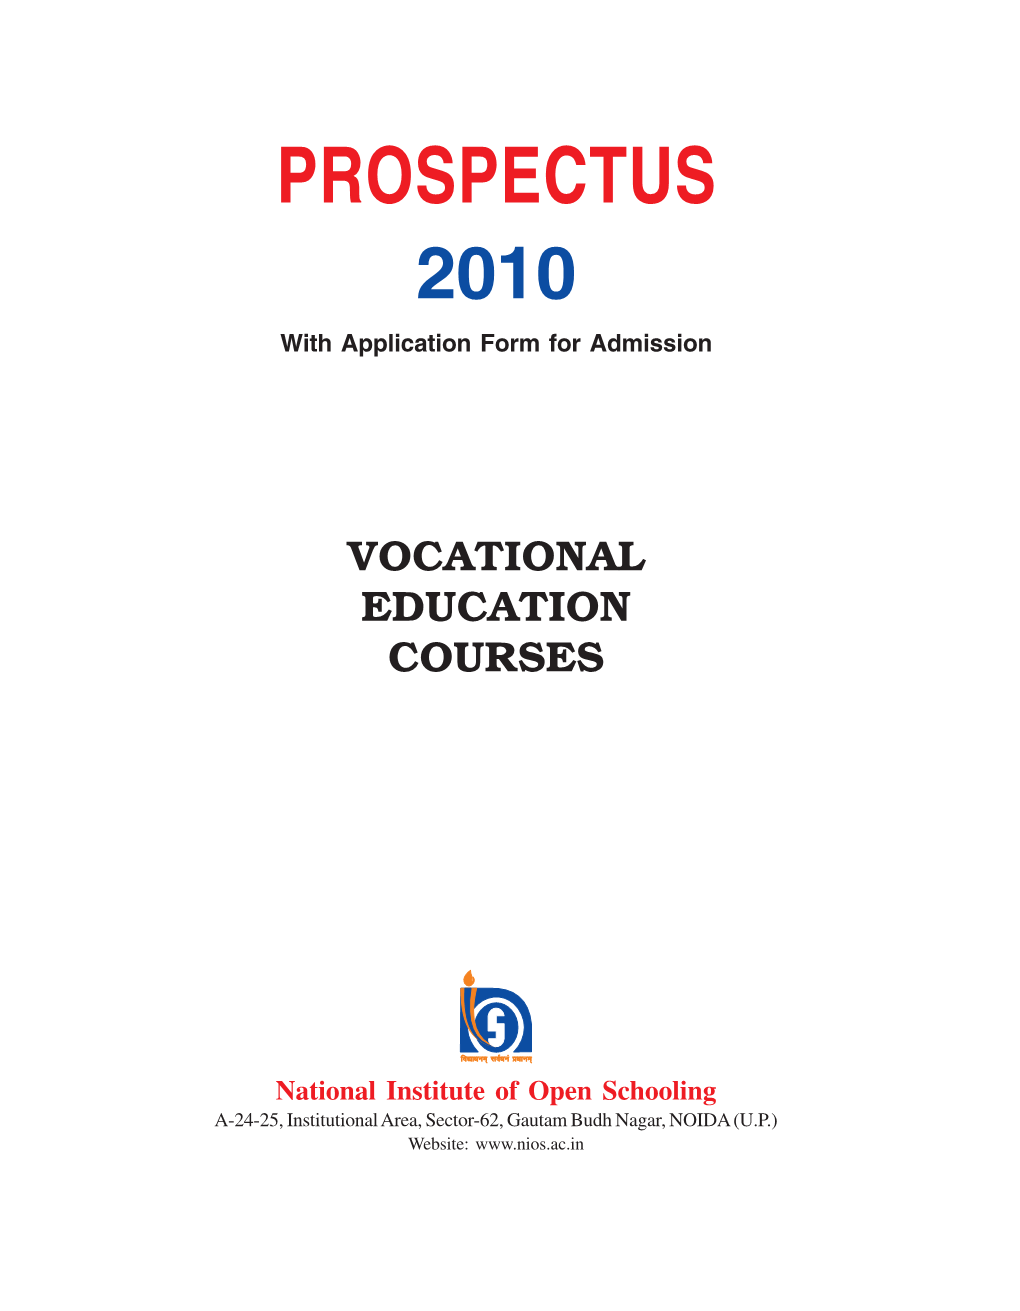 PROSPECTUS 2010 with Application Form for Admission